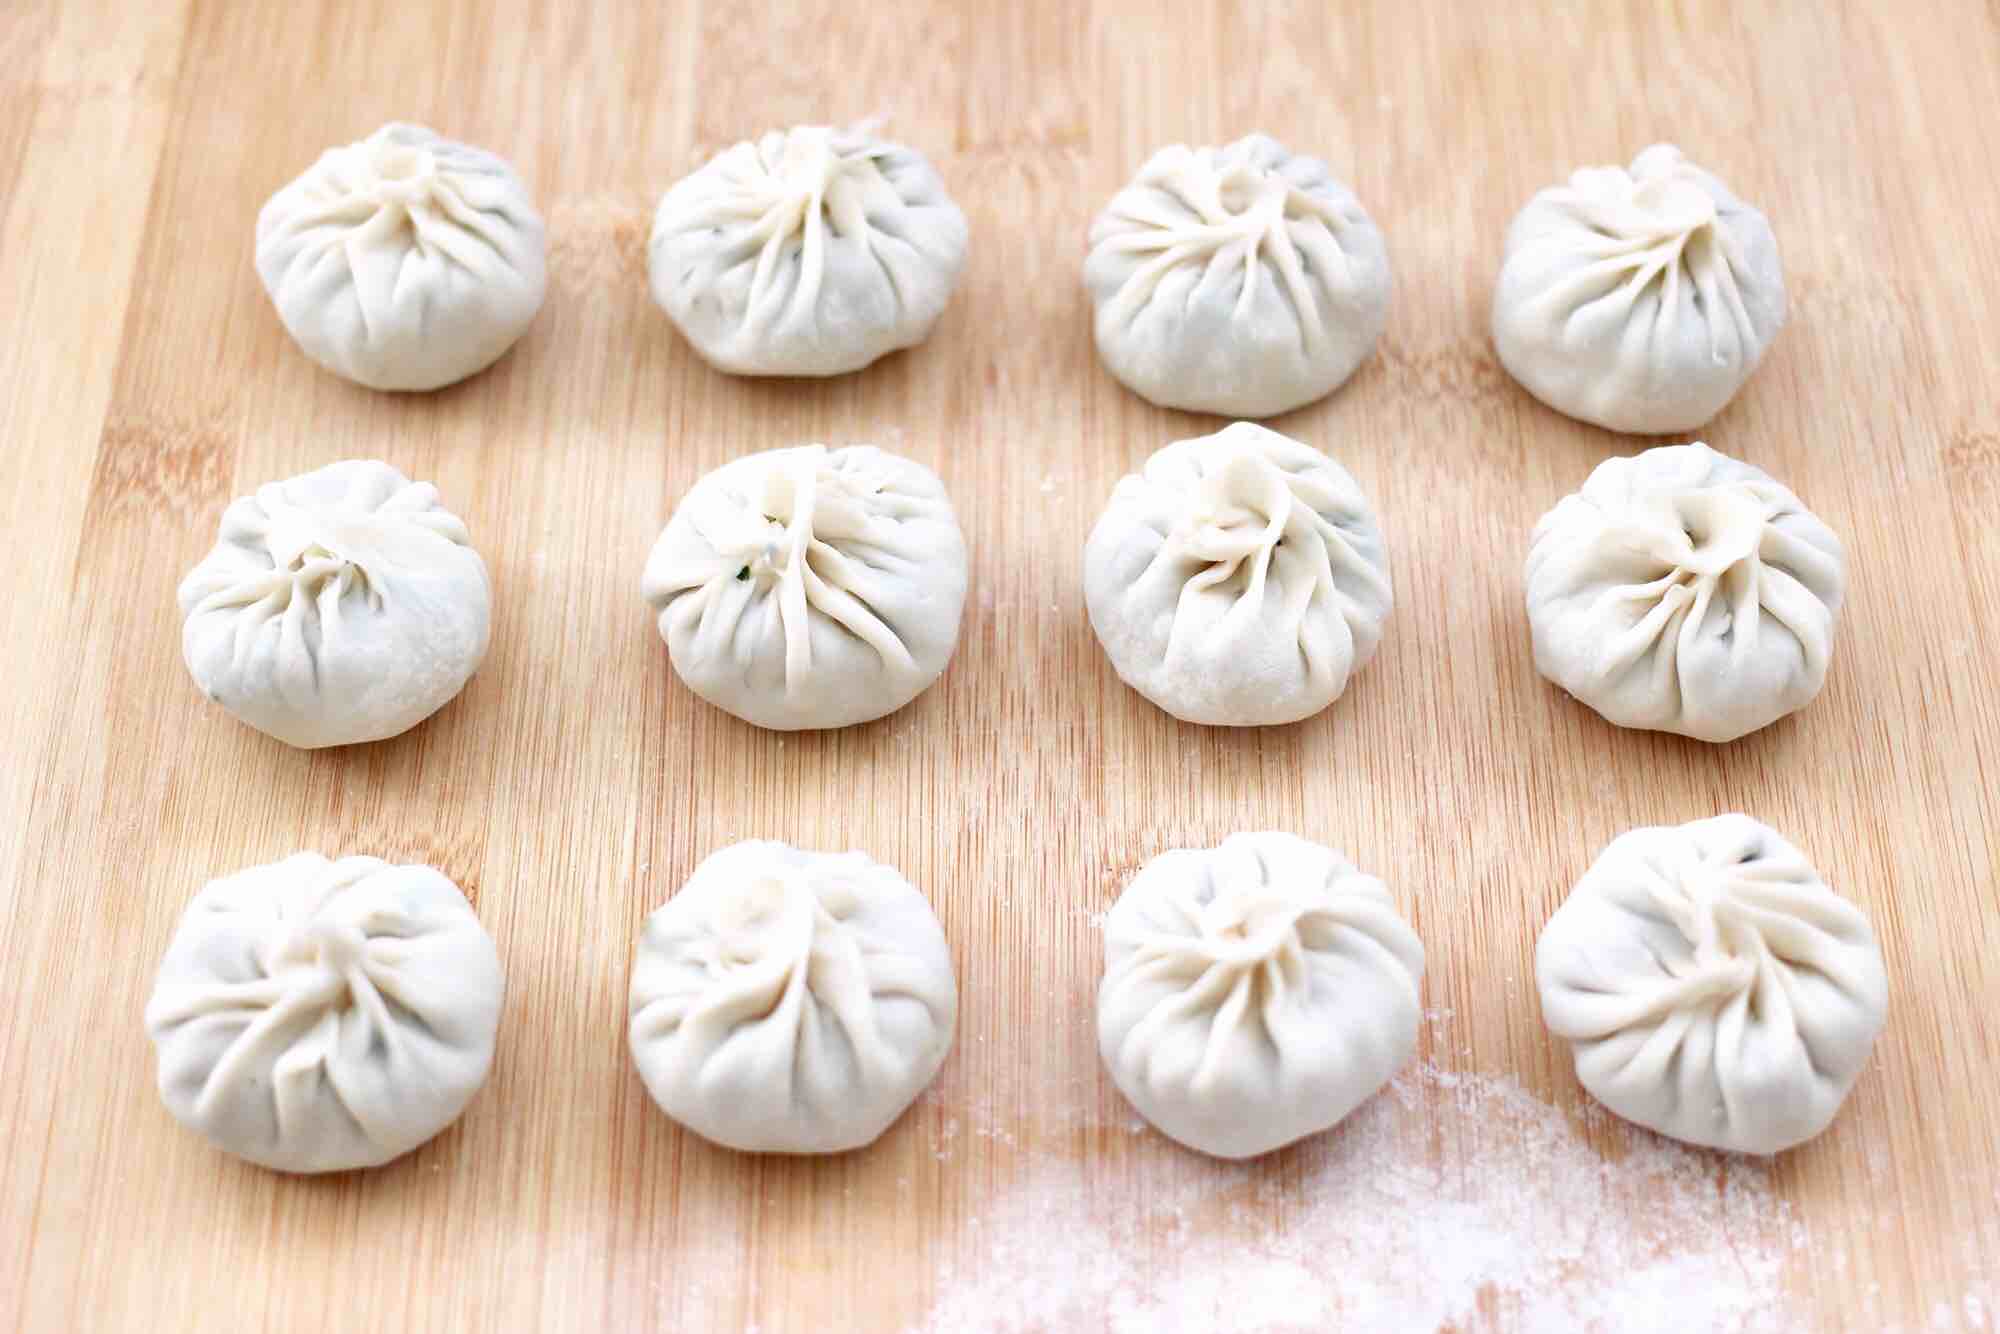 Steamed Buns with Pork and Haw Sauce recipe